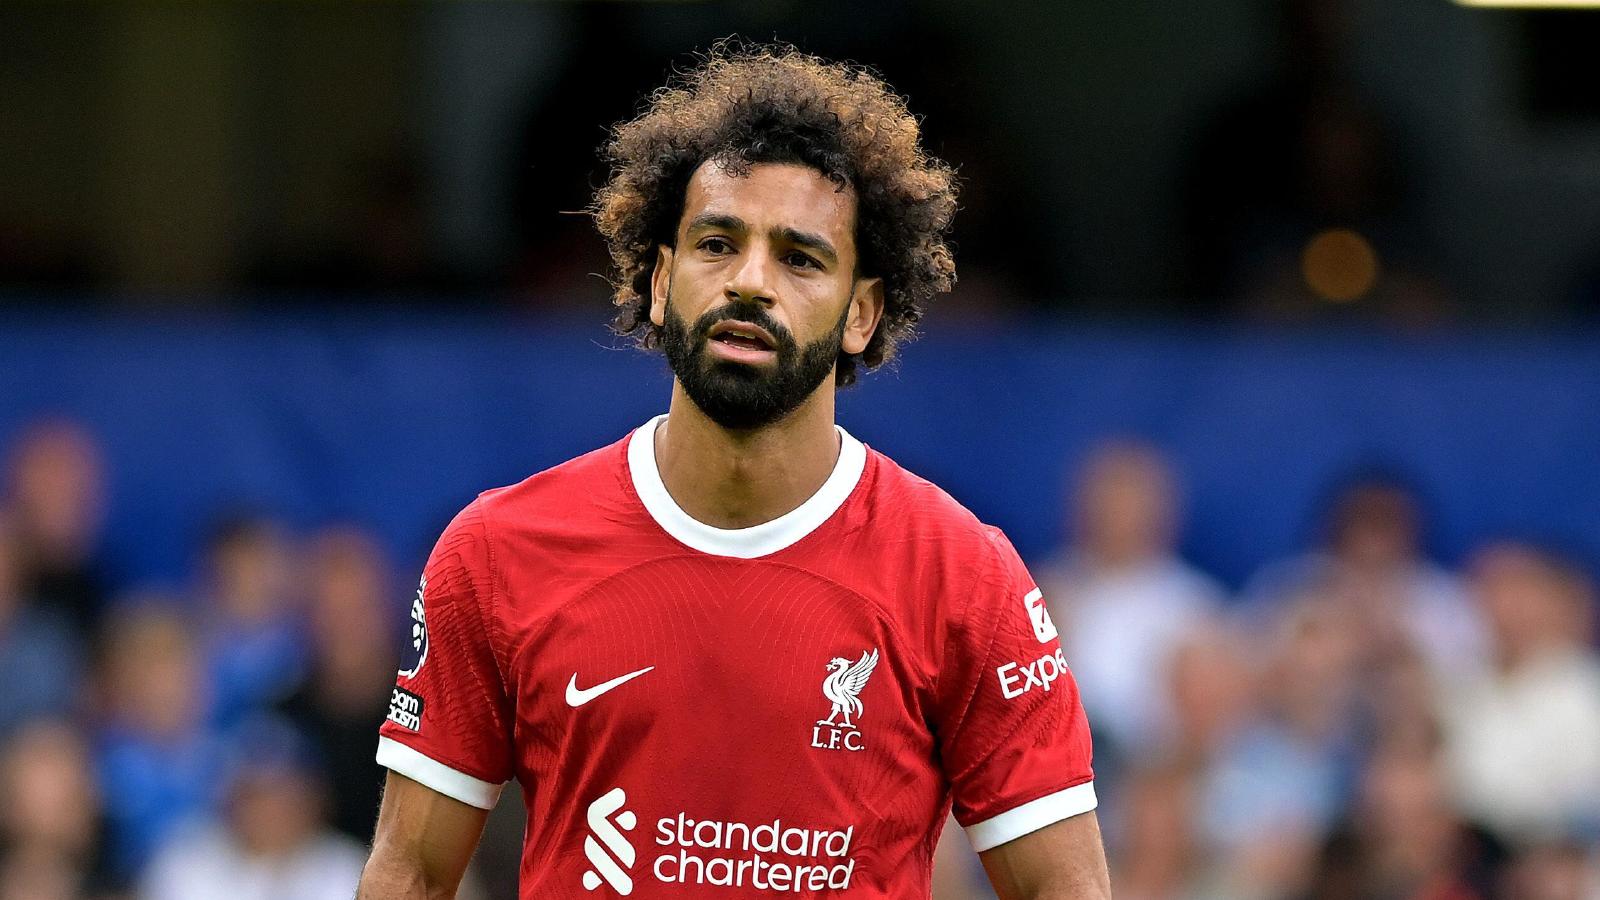 Mohamed Salah says ‘humanity must prevail’ in Israel-Gaza conflict